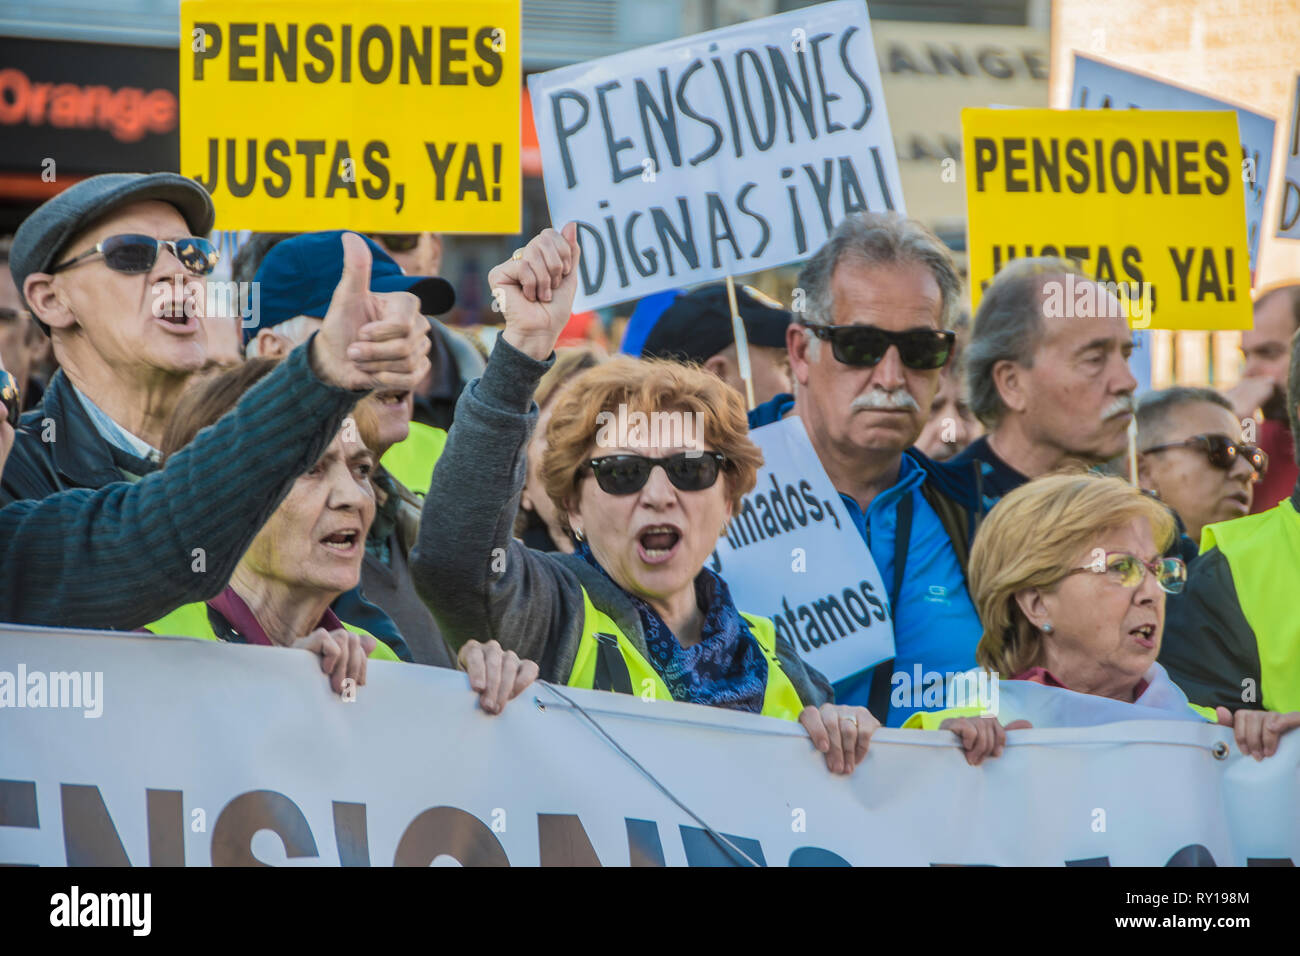 Madrid, Spain. 11th March, 2019. People with placards, ¨we dont want a thief goverment we want fair pensions¨. People from different regions of Madrid demonstrates againts pension cuts in Spain Credit: Alberto Sibaja Ramírez/Alamy Live News Stock Photo